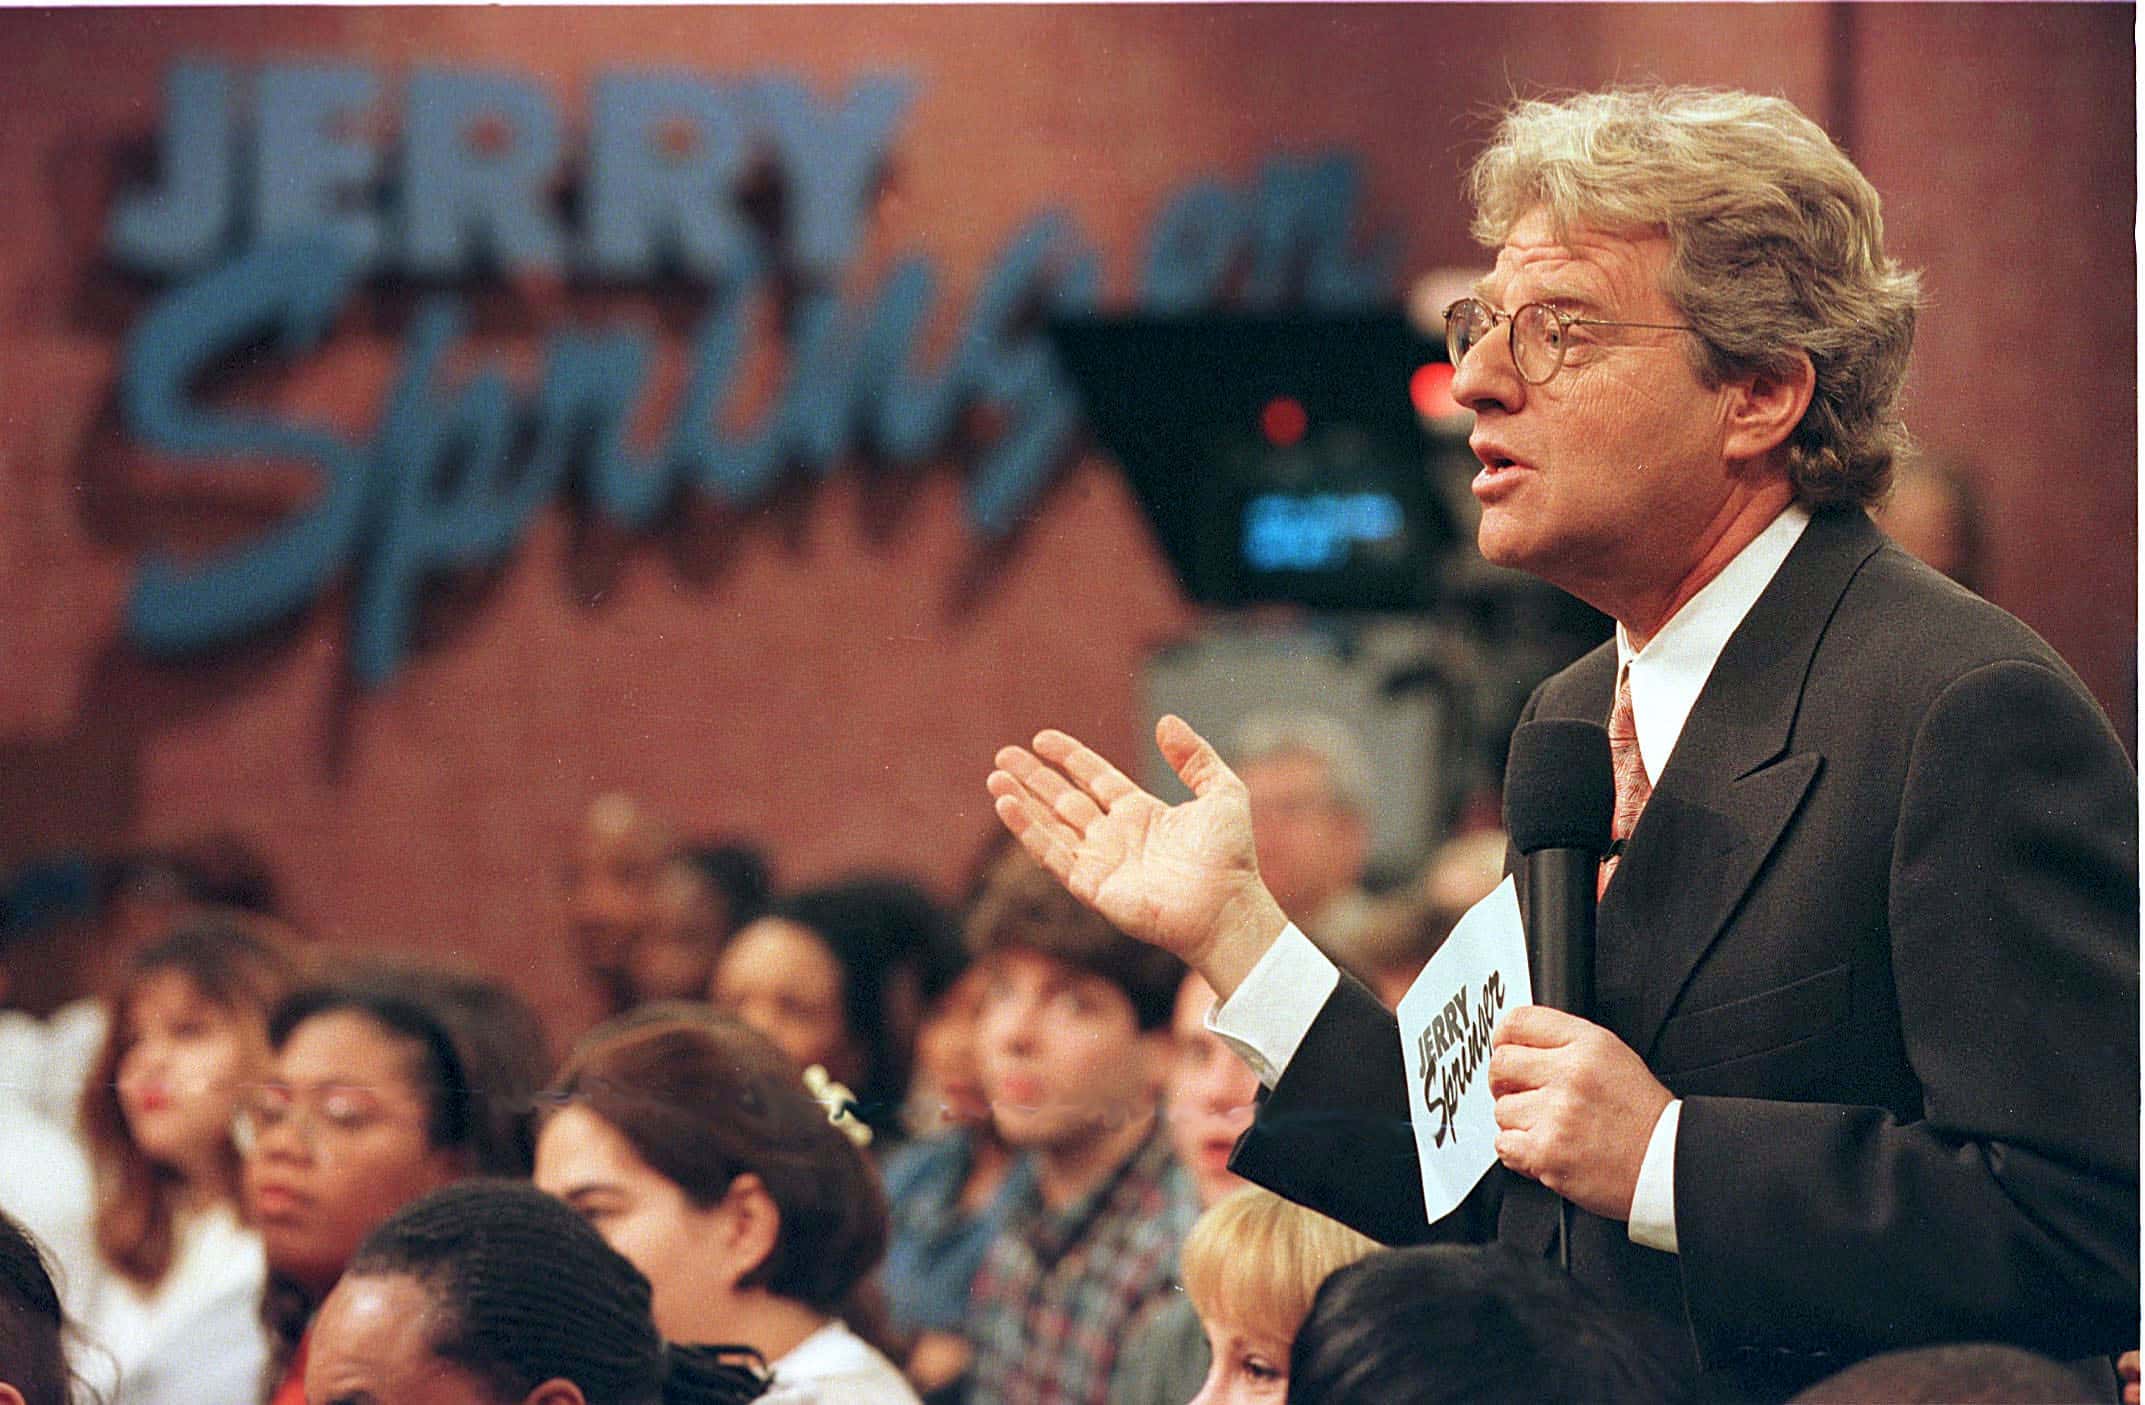 Jerry Springer Facts